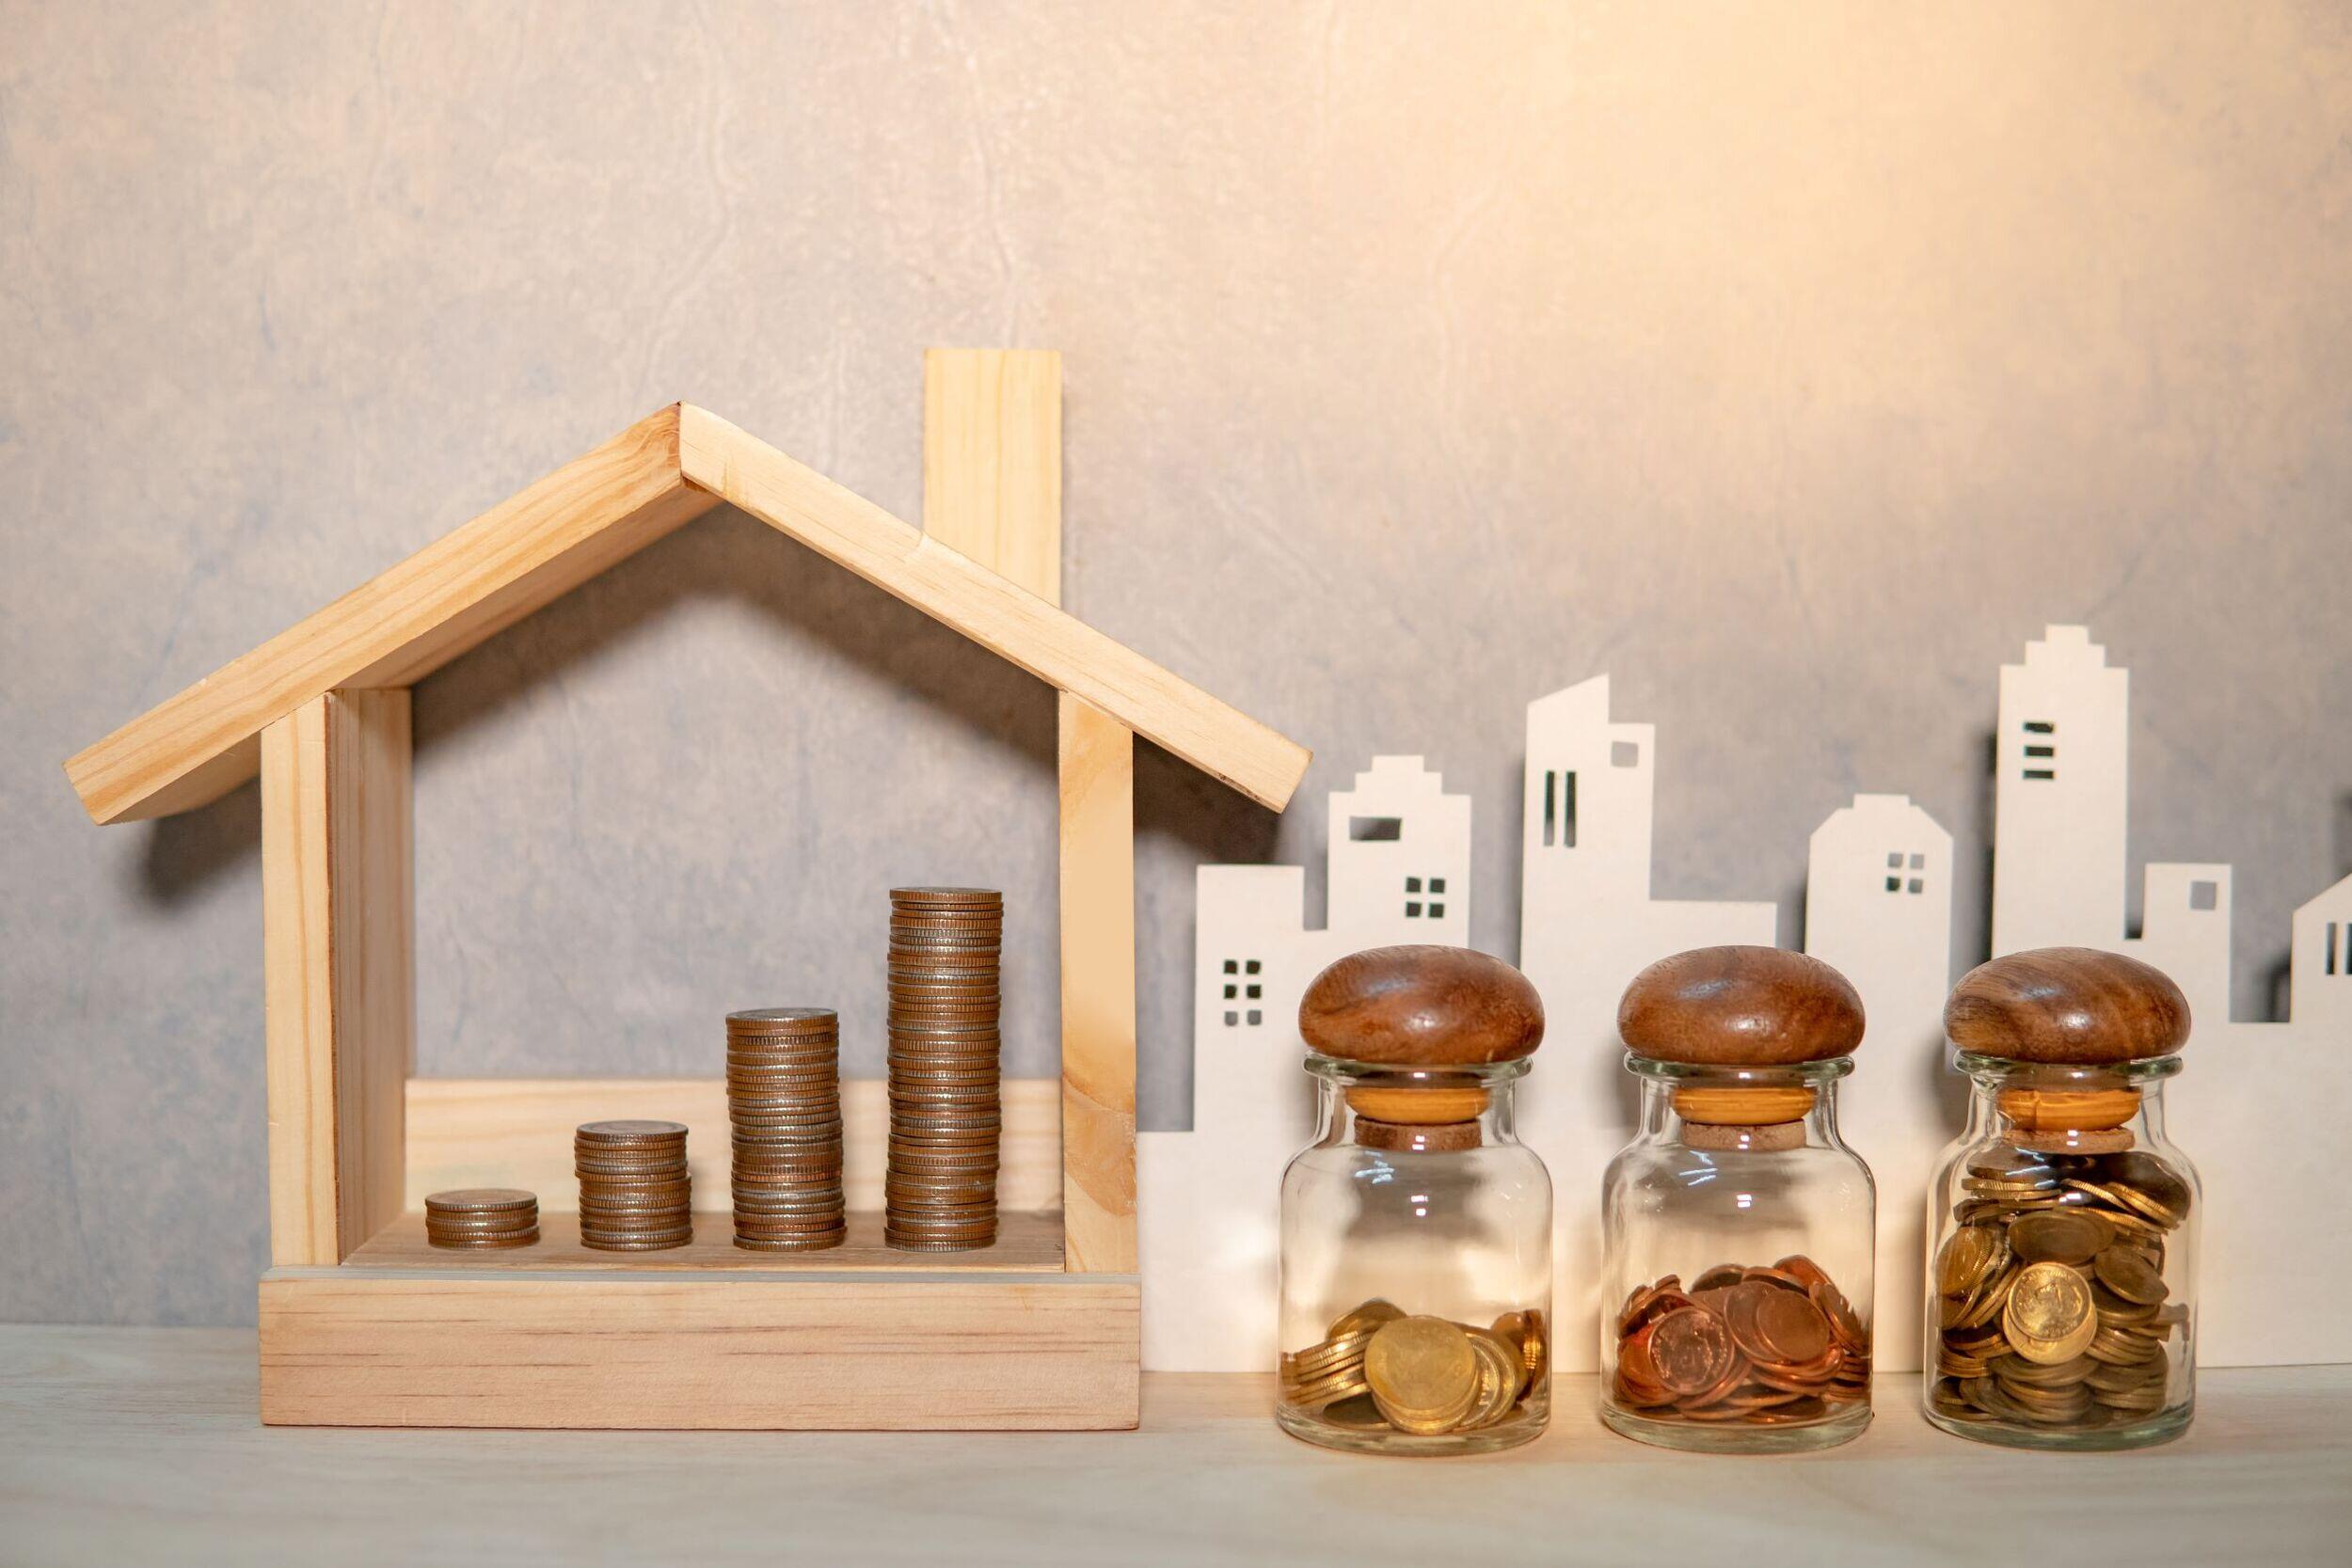 A small wooden house with stacks of coins inside. Next to it are three glass shakers with coins in them. Behind all that is the outlines of a city skyline.